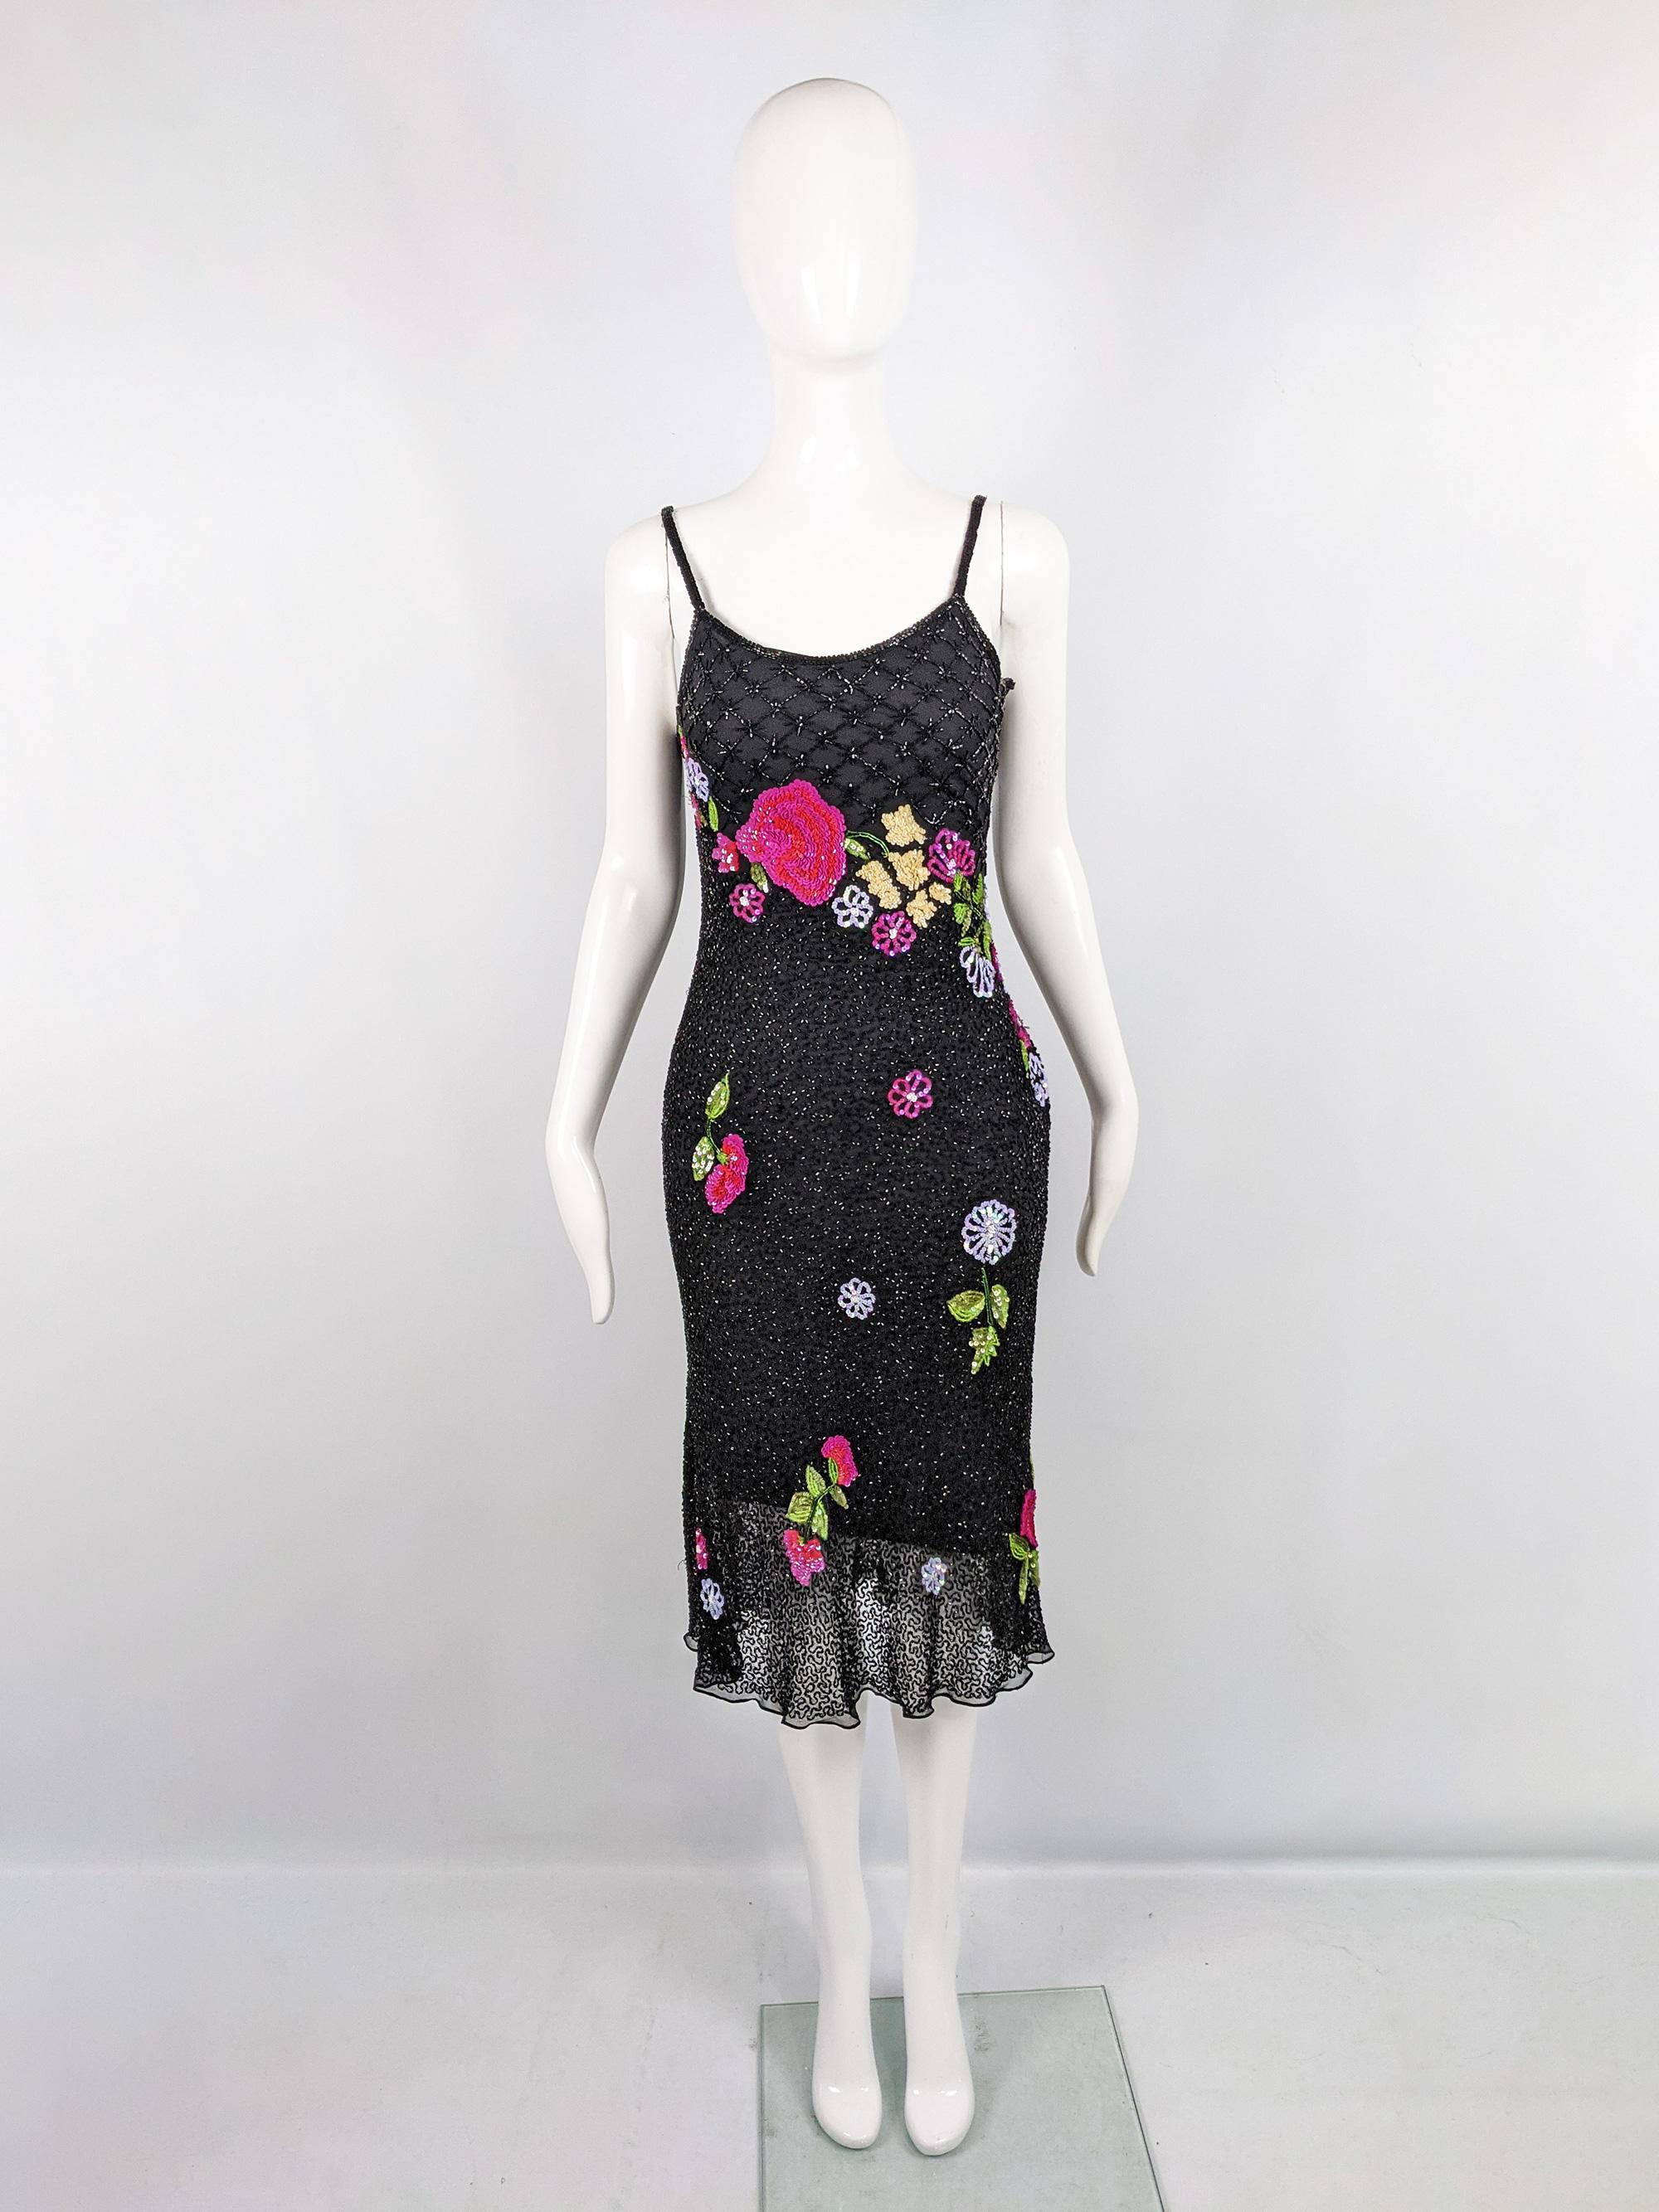 A stunning vintage womens slip dress from the 90s by quality label, Aftershock. In a black pure silk fabric embellished with glass bugle beads and colourful sequins in the shape of flowers throughout. Perfect 

Size: Marked S and measures roughly